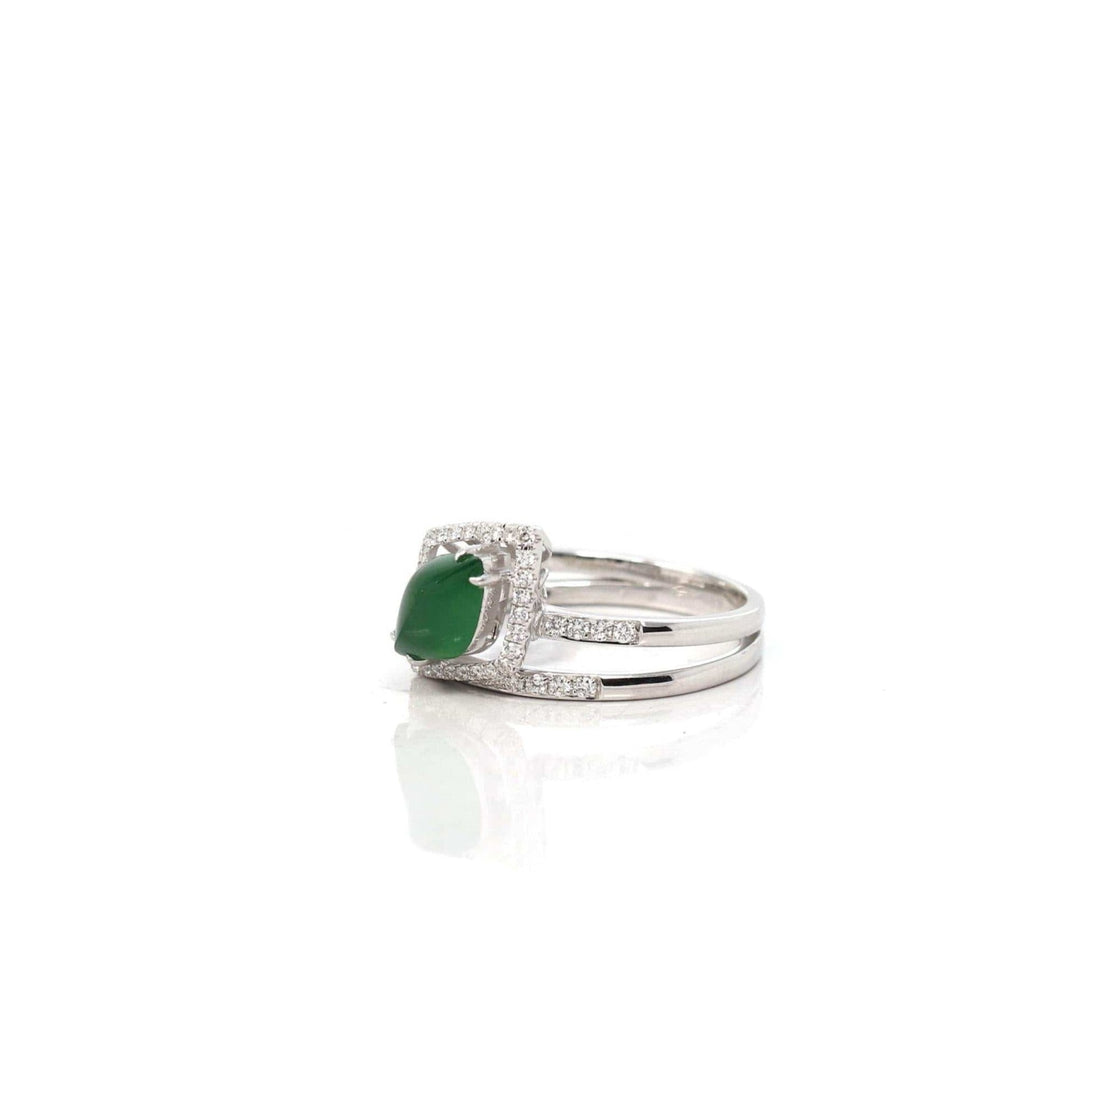 Baikalla Jewelry Jadeite Engagement Ring Copy of Copy of Copy of 18k White Gold Natural Imperial Green Oval Jadeite Jade Engagement Ring With Diamonds